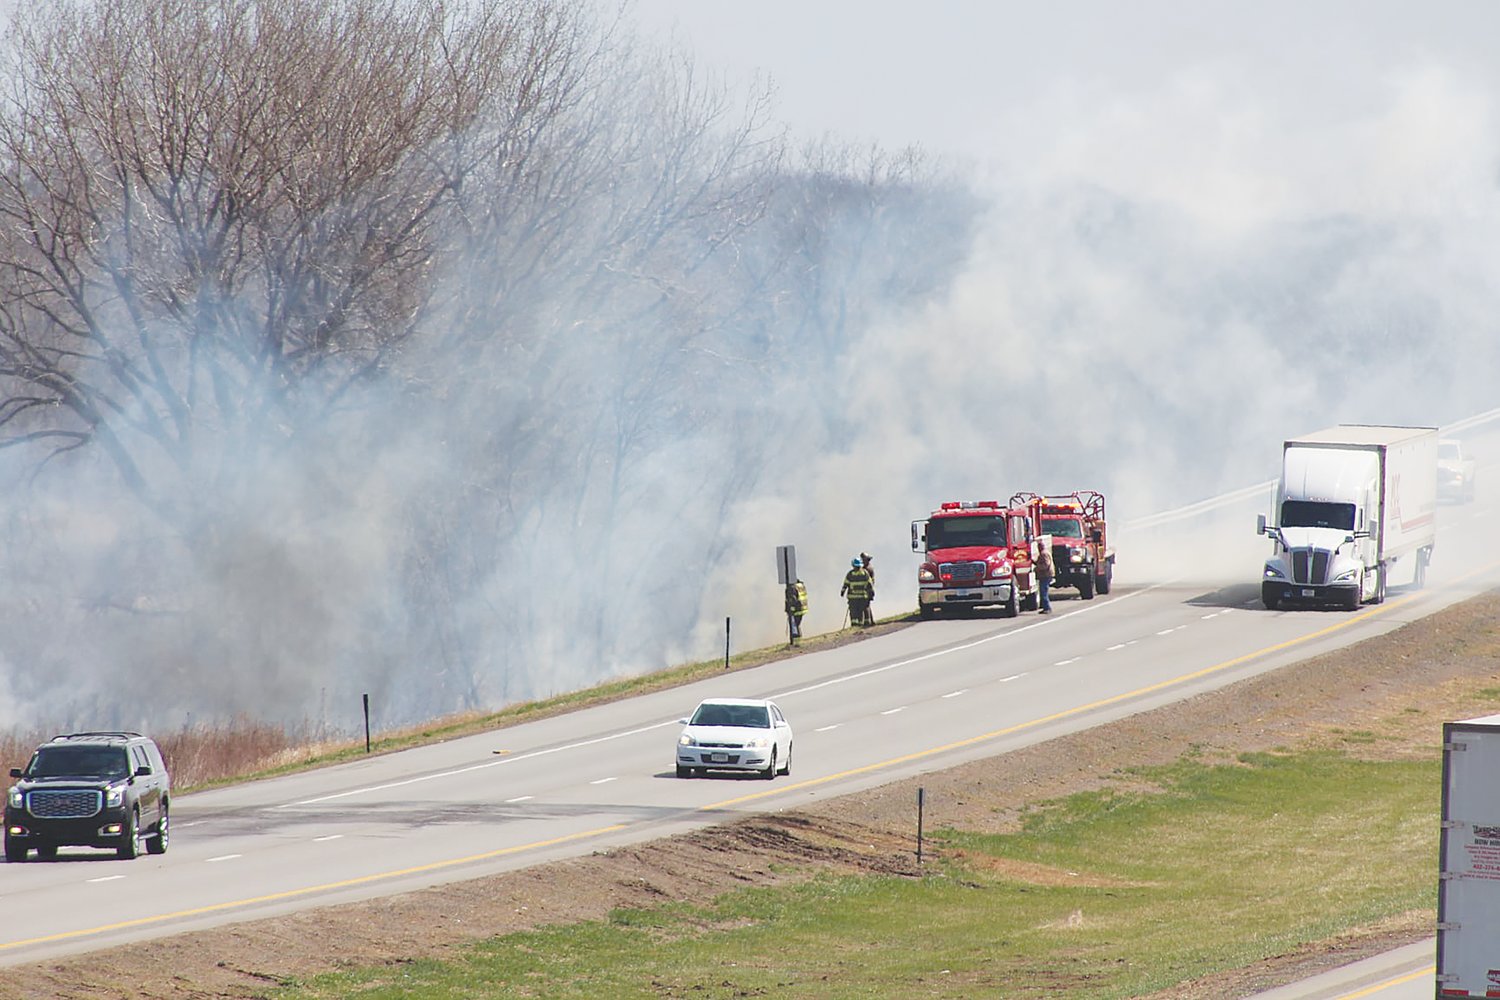 Seward and Milford Fire respond to a grass fire April 13 near 266th and Holdrege Road, just off the Seward I-80 interchange. The fire burned about 100 yards and up the embankment toward the interstate.